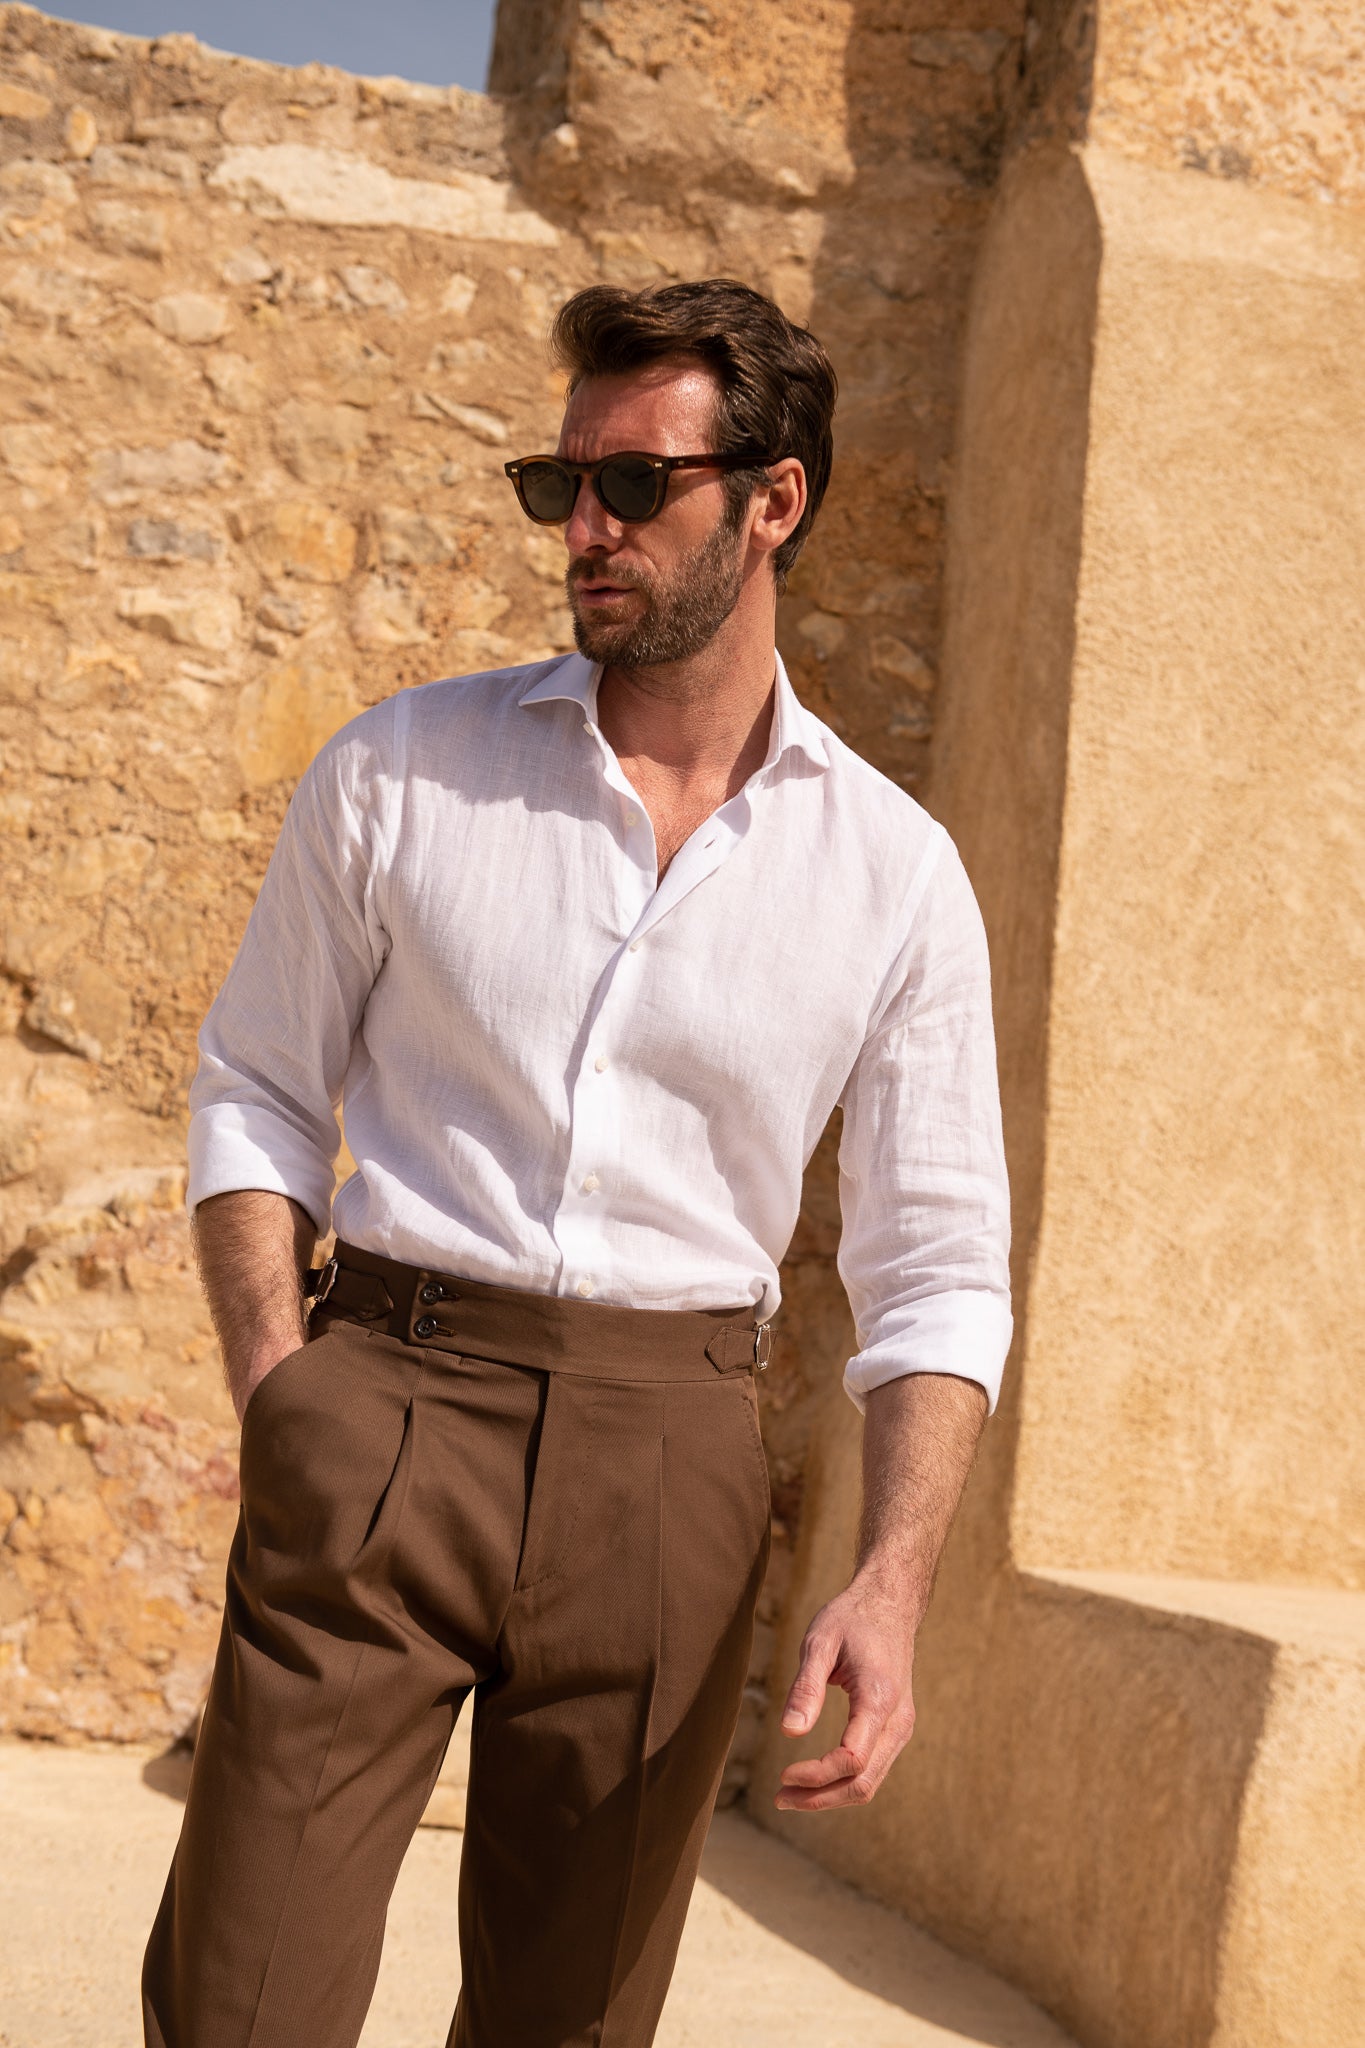 Brown cotton trousers Soragna Capsule Collection - Made in Italy